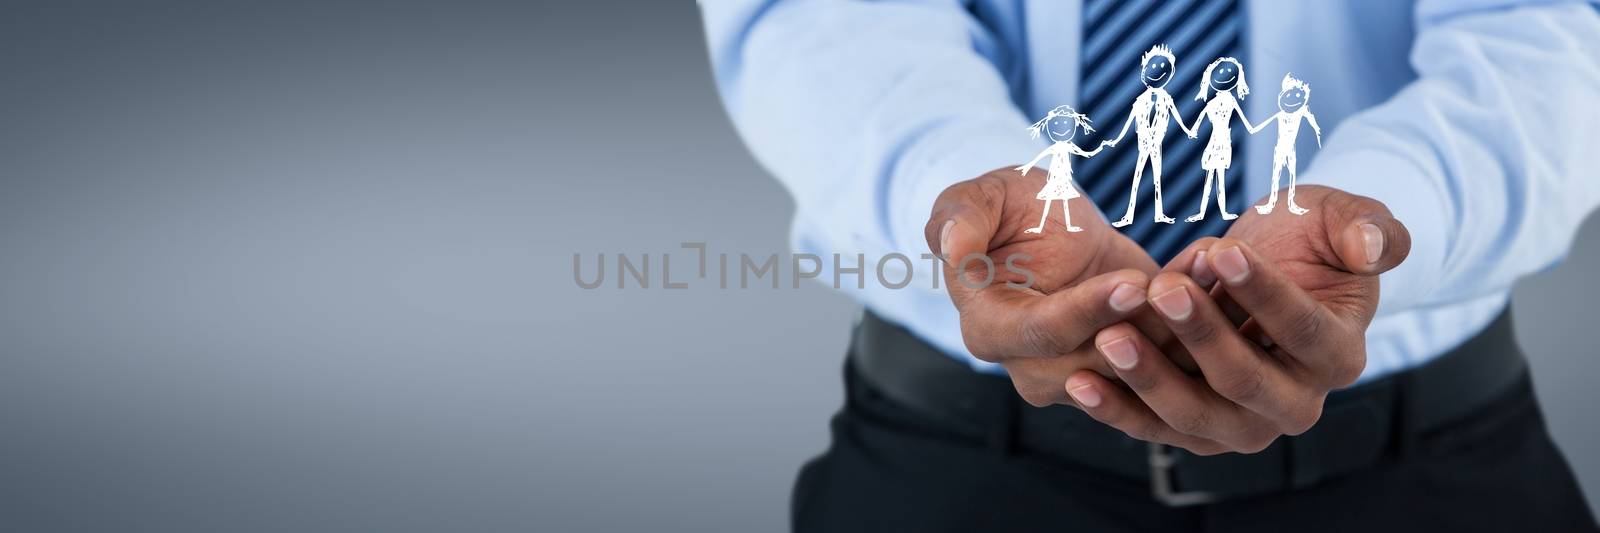 Man holding family icon against grey background as family insurance concept by Wavebreakmedia